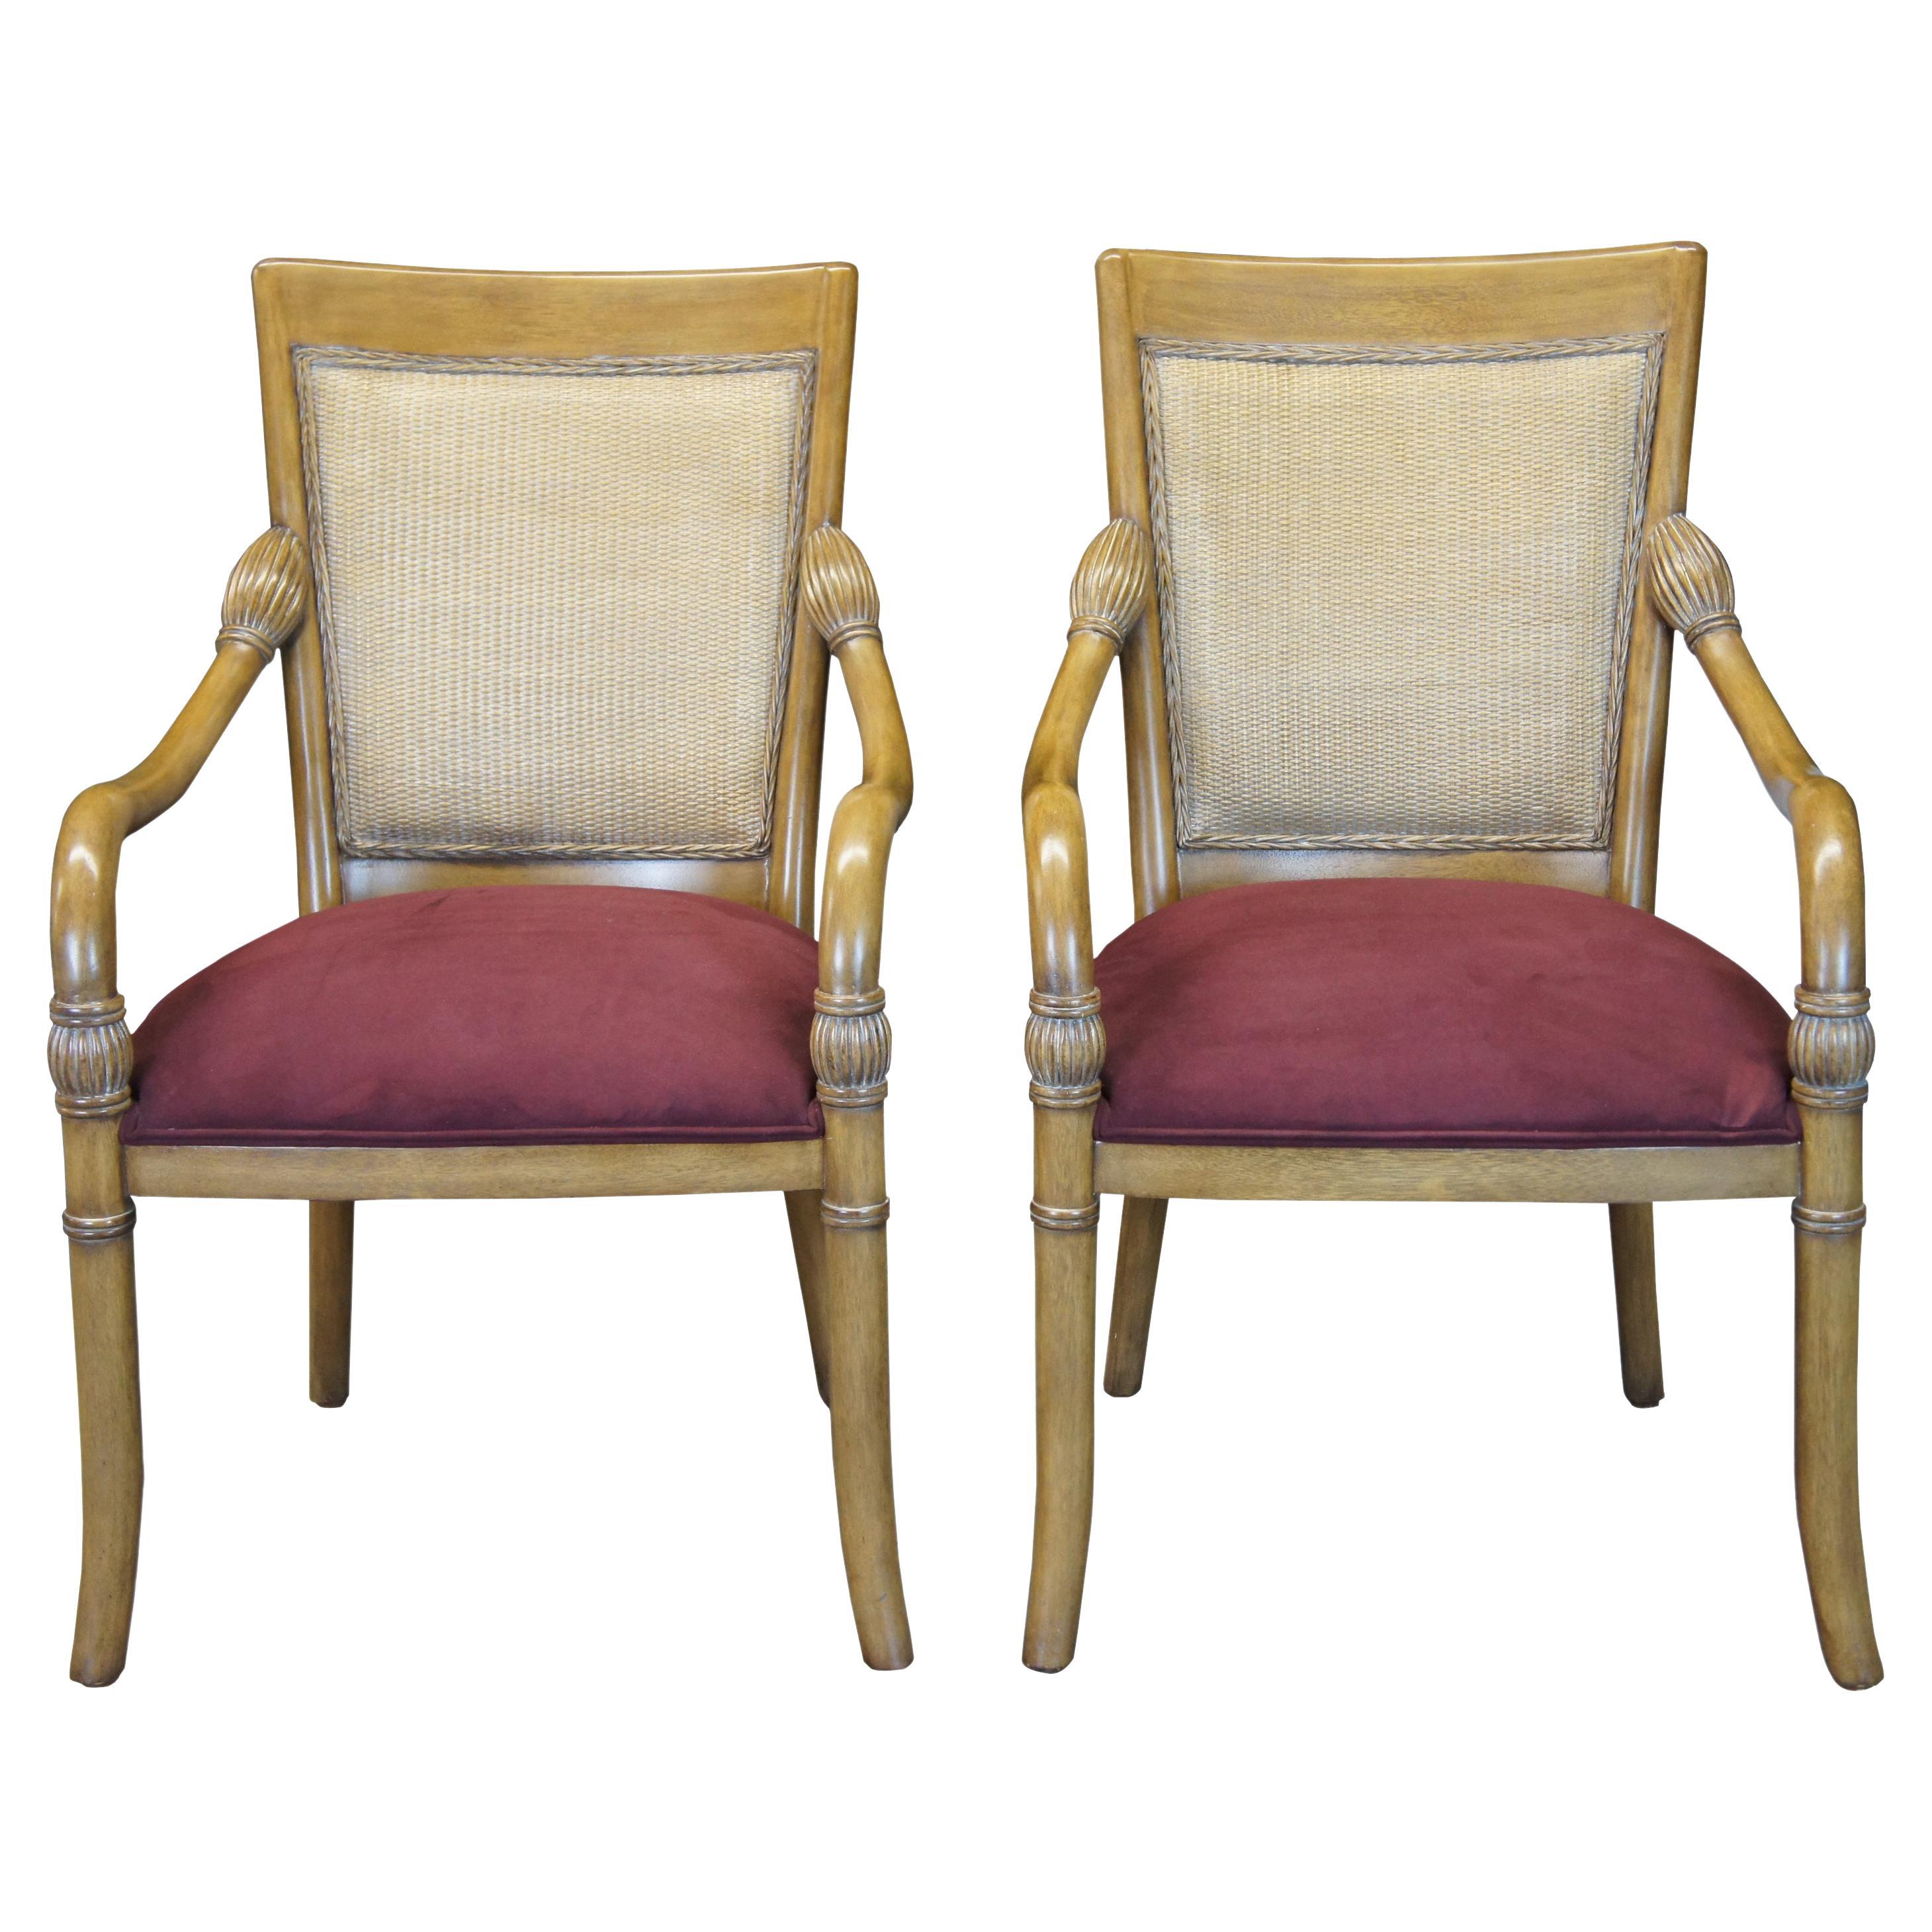 Empire Dining Room Chairs